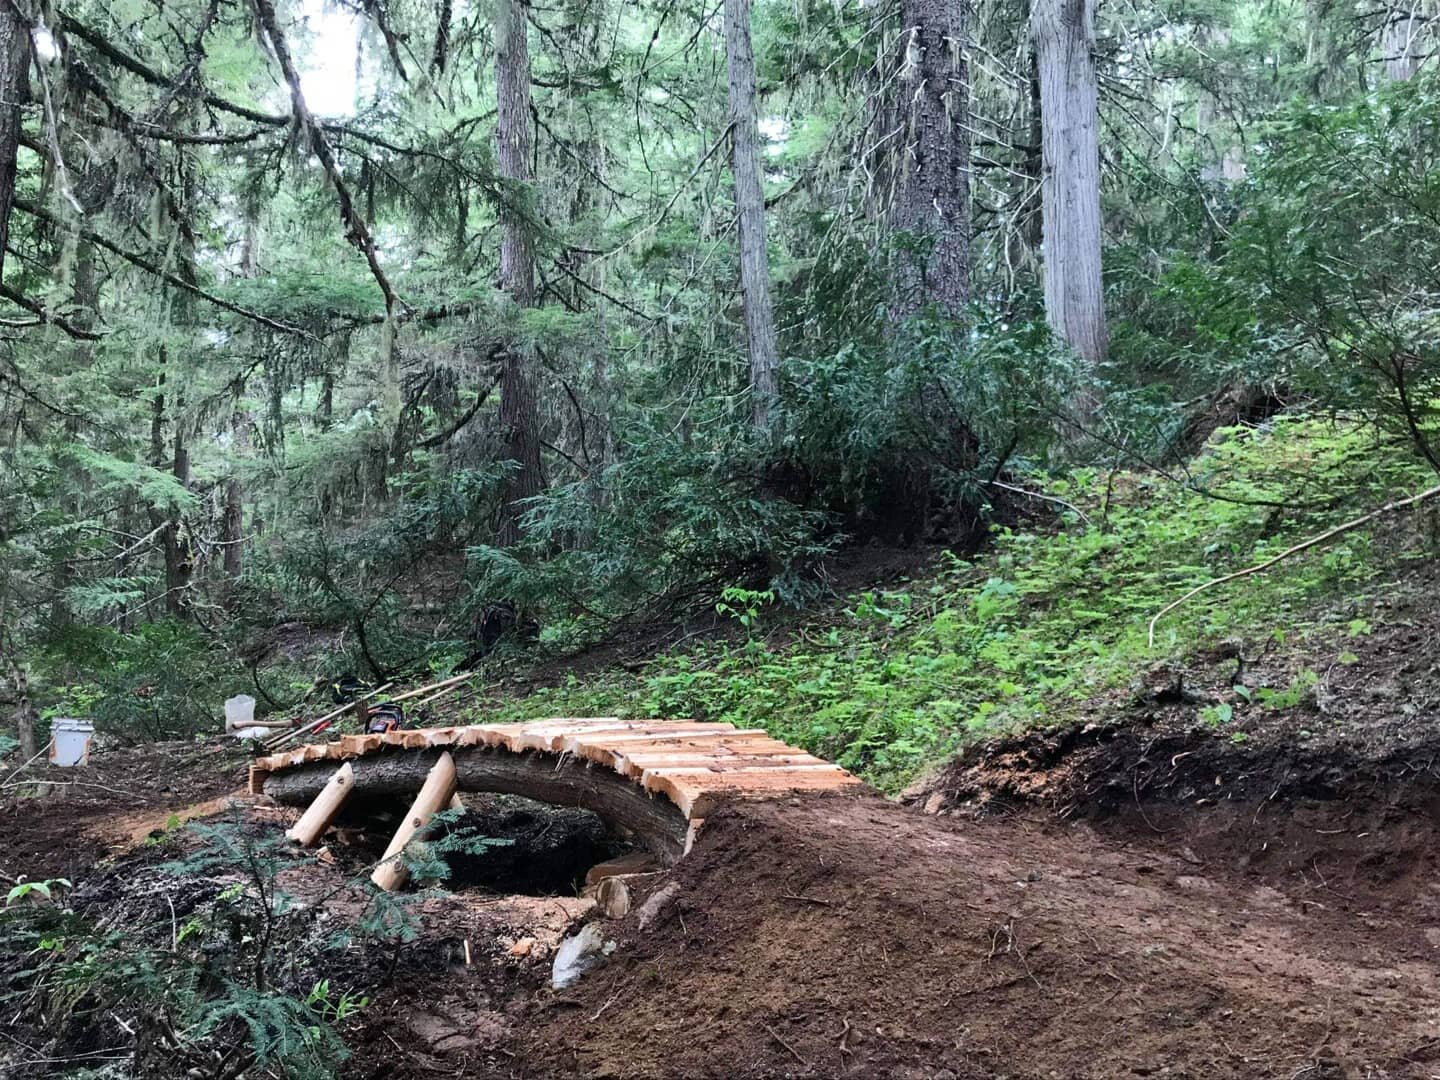 New wood on Below the God's (Smallwood)

NCC trail crew has cleared and worked on the trail. Couple sections have been modified (for the better) but please ride accordingly. Enjoy! 
.
.
.
#nelsonbc #mountainbikebc #mountainbike #kootenaylife #ncc #ko